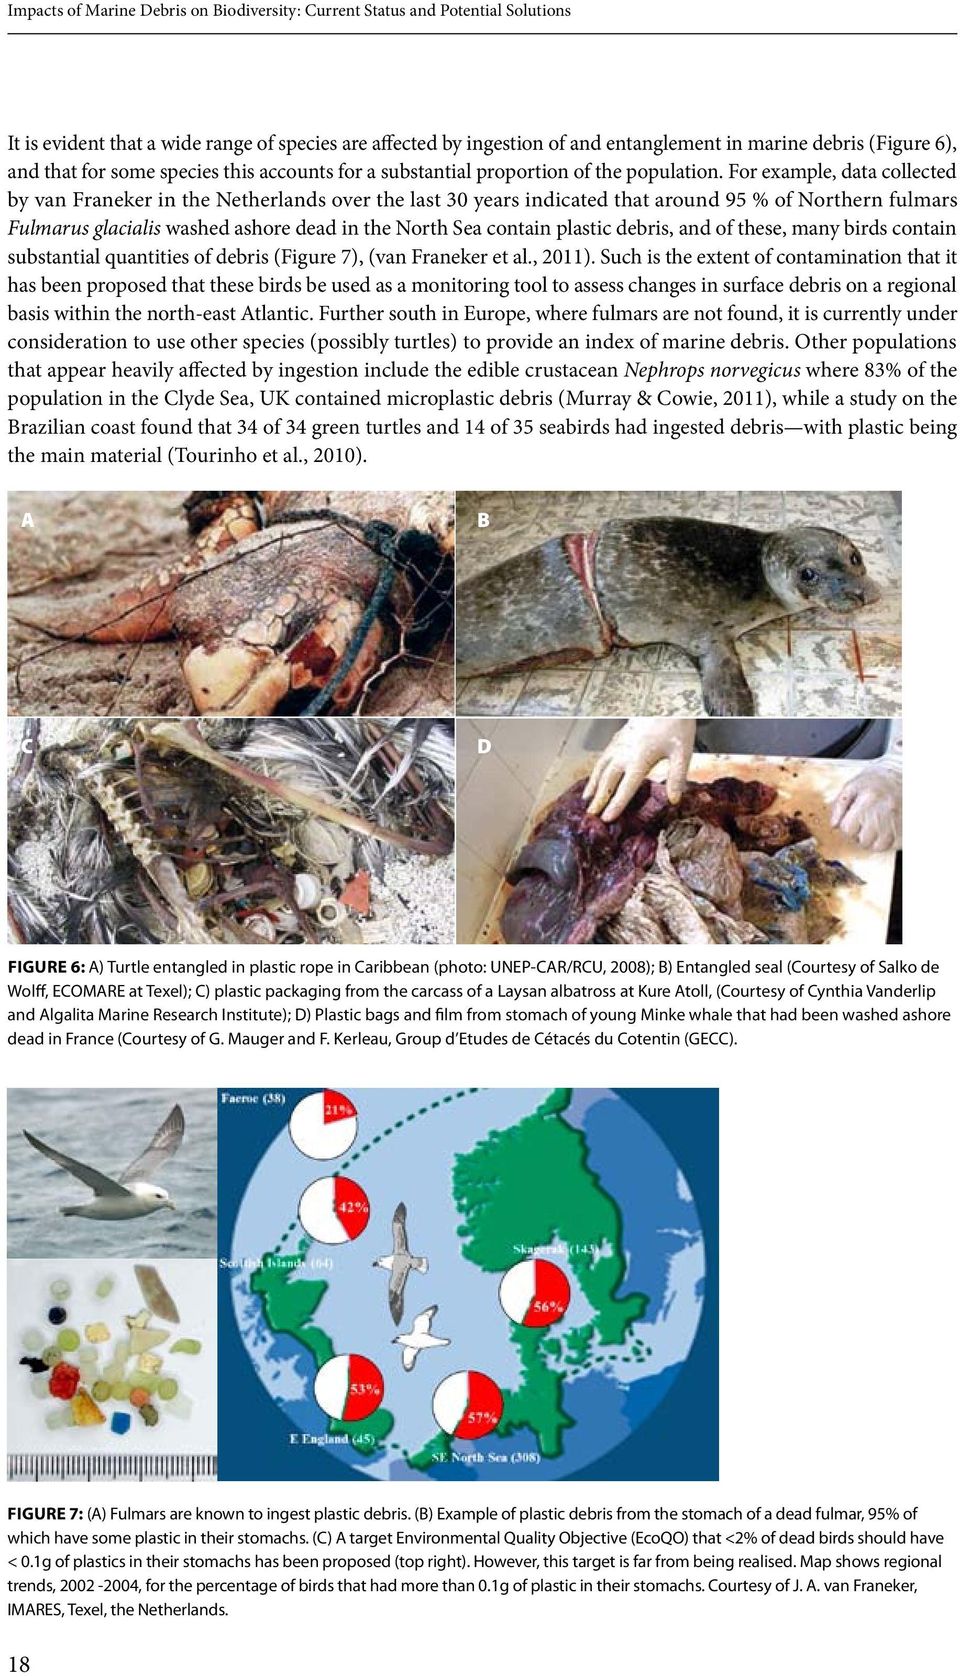 For example, data collected by van Franeker in the Netherlands over the last 30 years indicated that around 95 % of Northern fulmars Fulmarus glacialis washed ashore dead in the North Sea contain